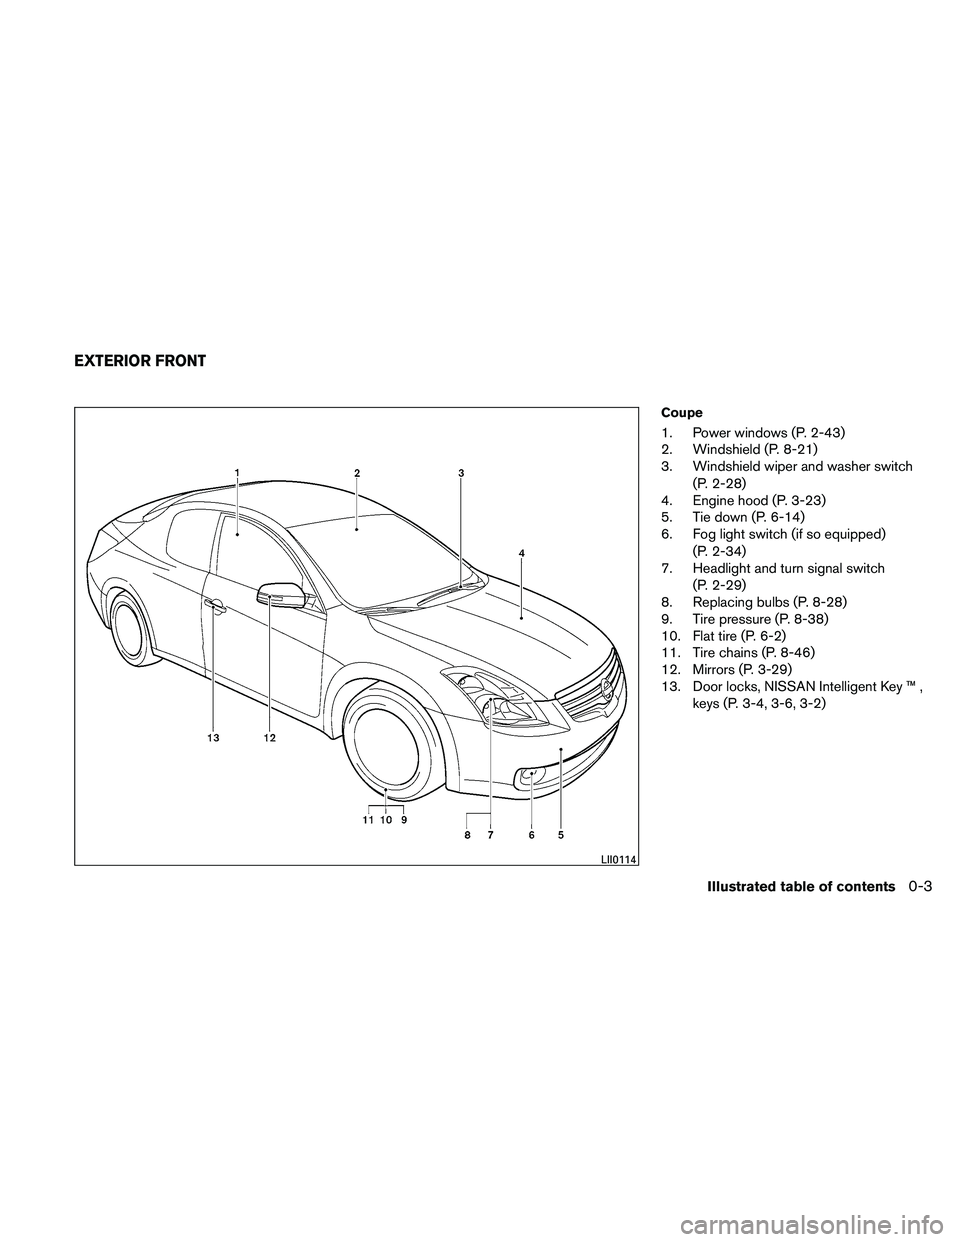 NISSAN ALTIMA 2011  Owners Manual Coupe
1. Power windows (P. 2-43)
2. Windshield (P. 8-21)
3. Windshield wiper and washer switch(P. 2-28)
4. Engine hood (P. 3-23)
5. Tie down (P. 6-14)
6. Fog light switch (if so equipped)
(P. 2-34)
7.